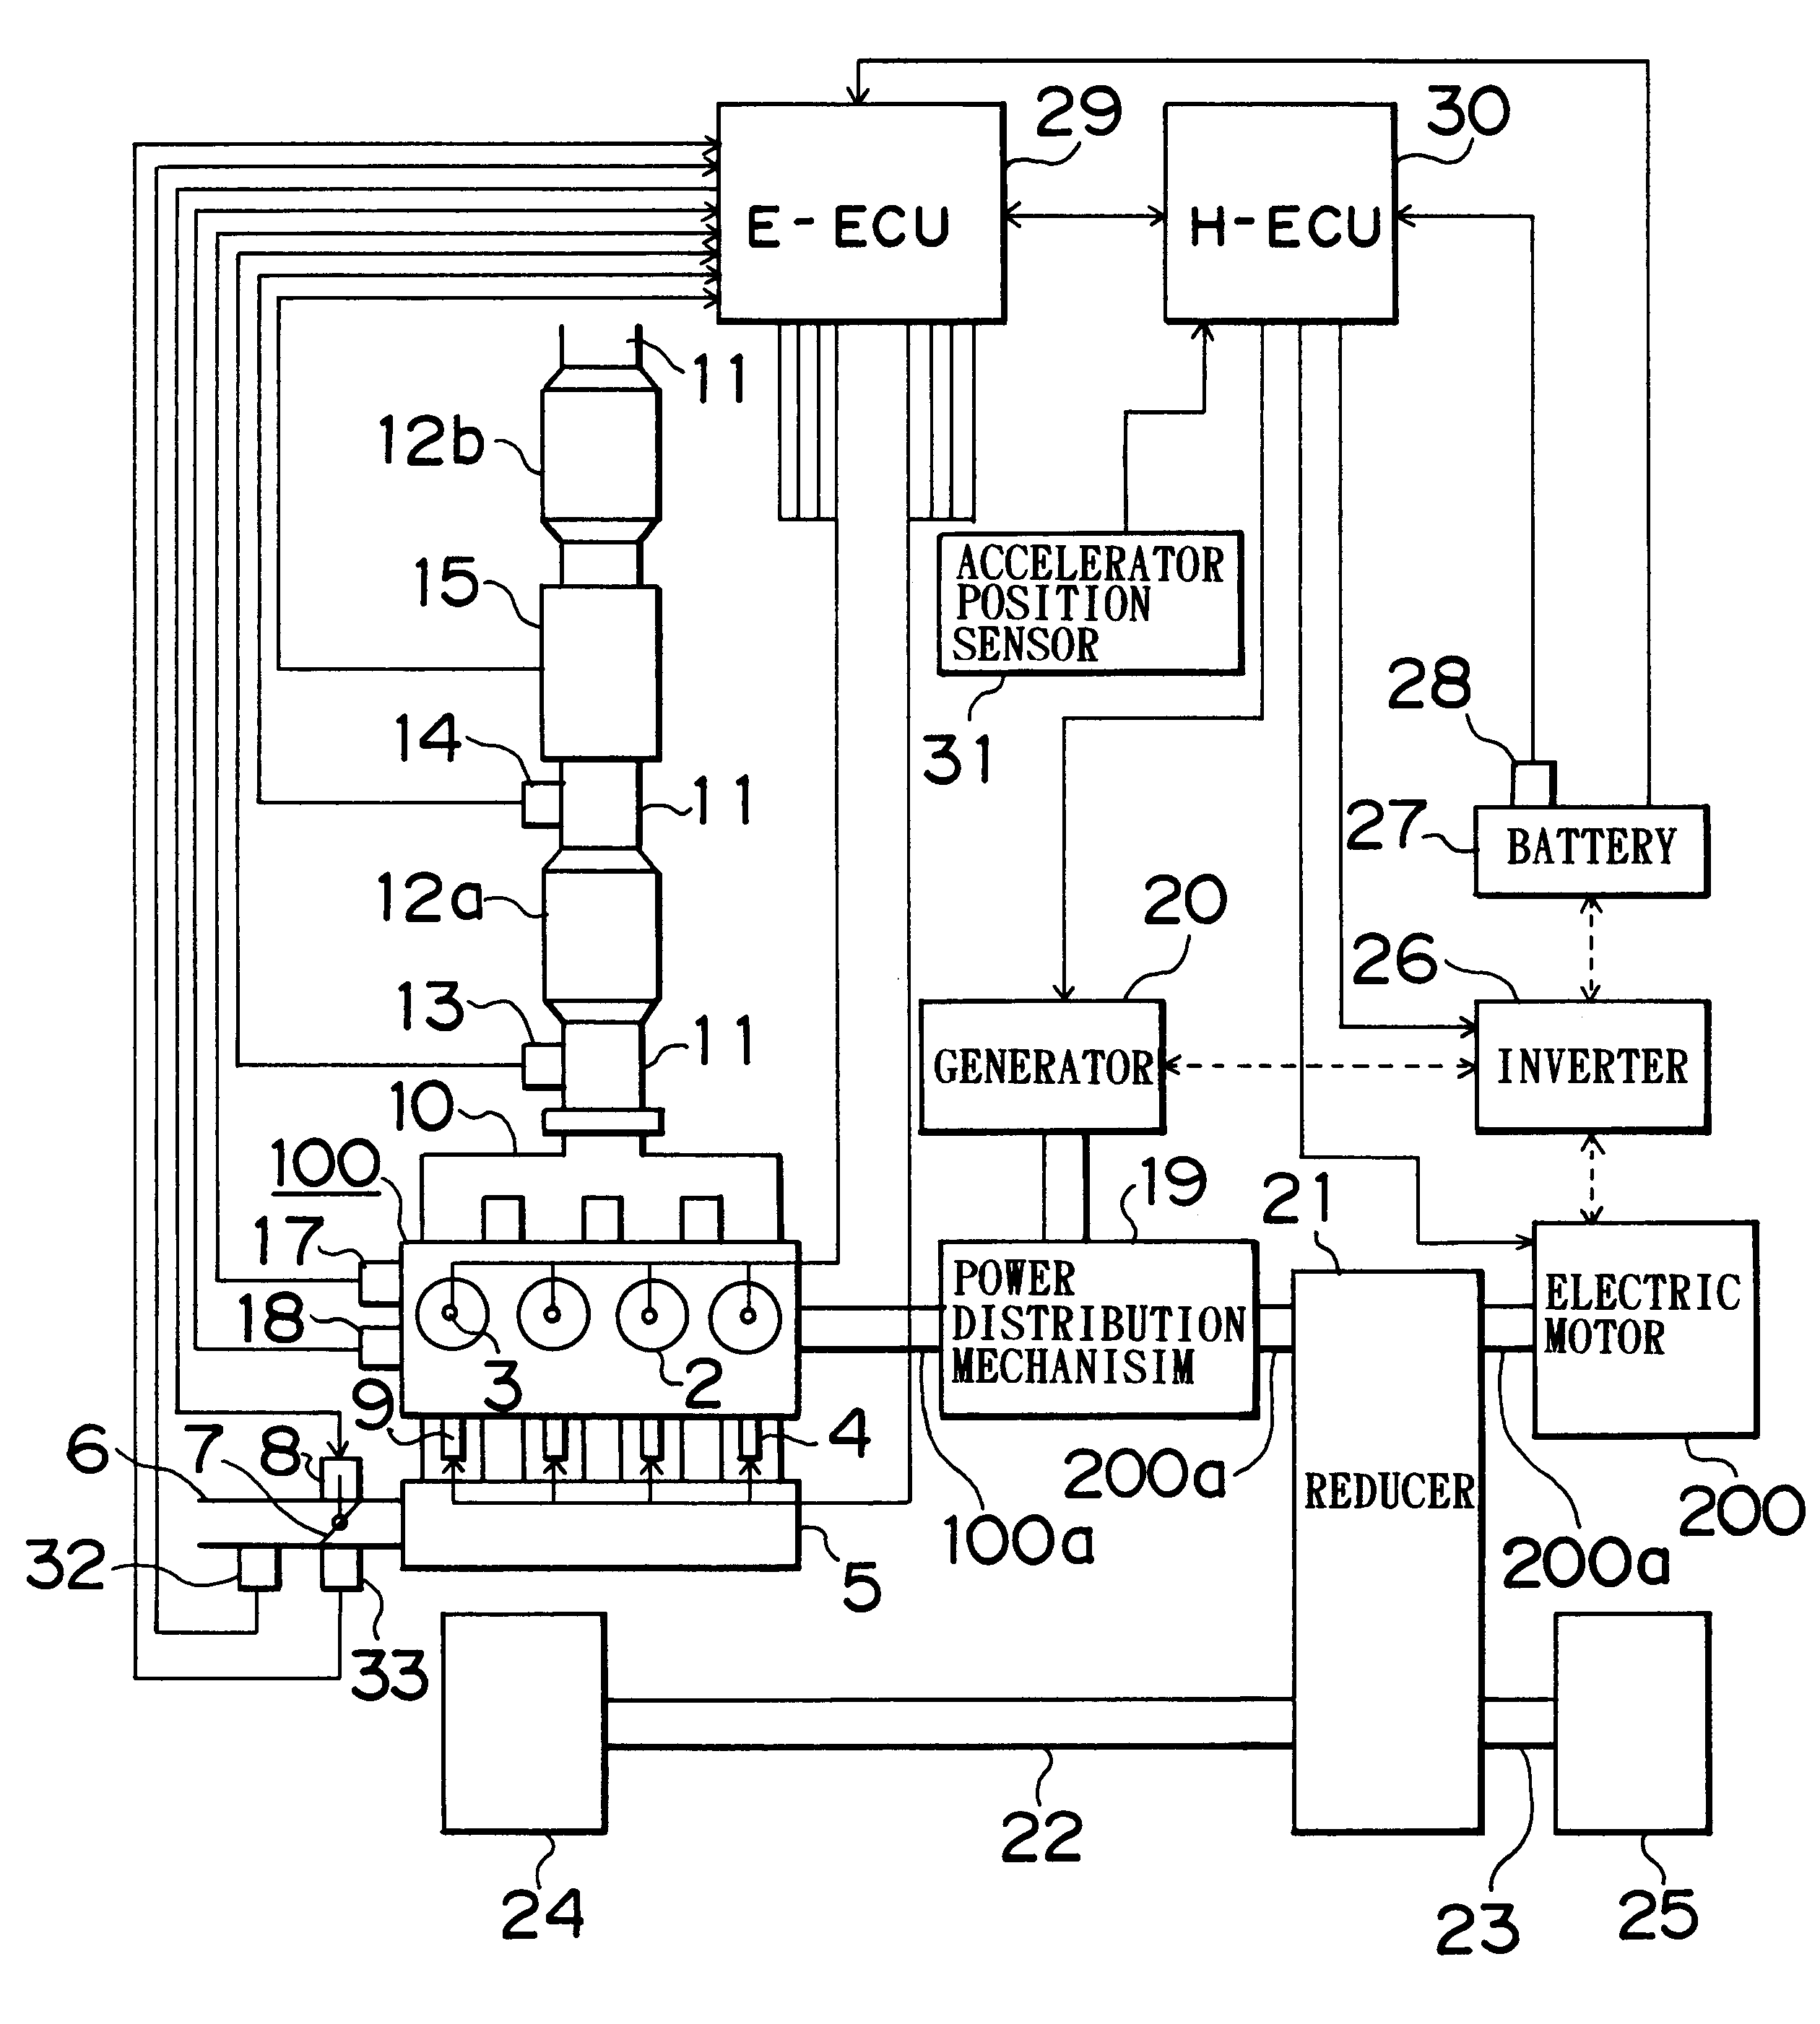 Exhaust gas purifier and method of purifying exhaust gas for a hybrid vehicle